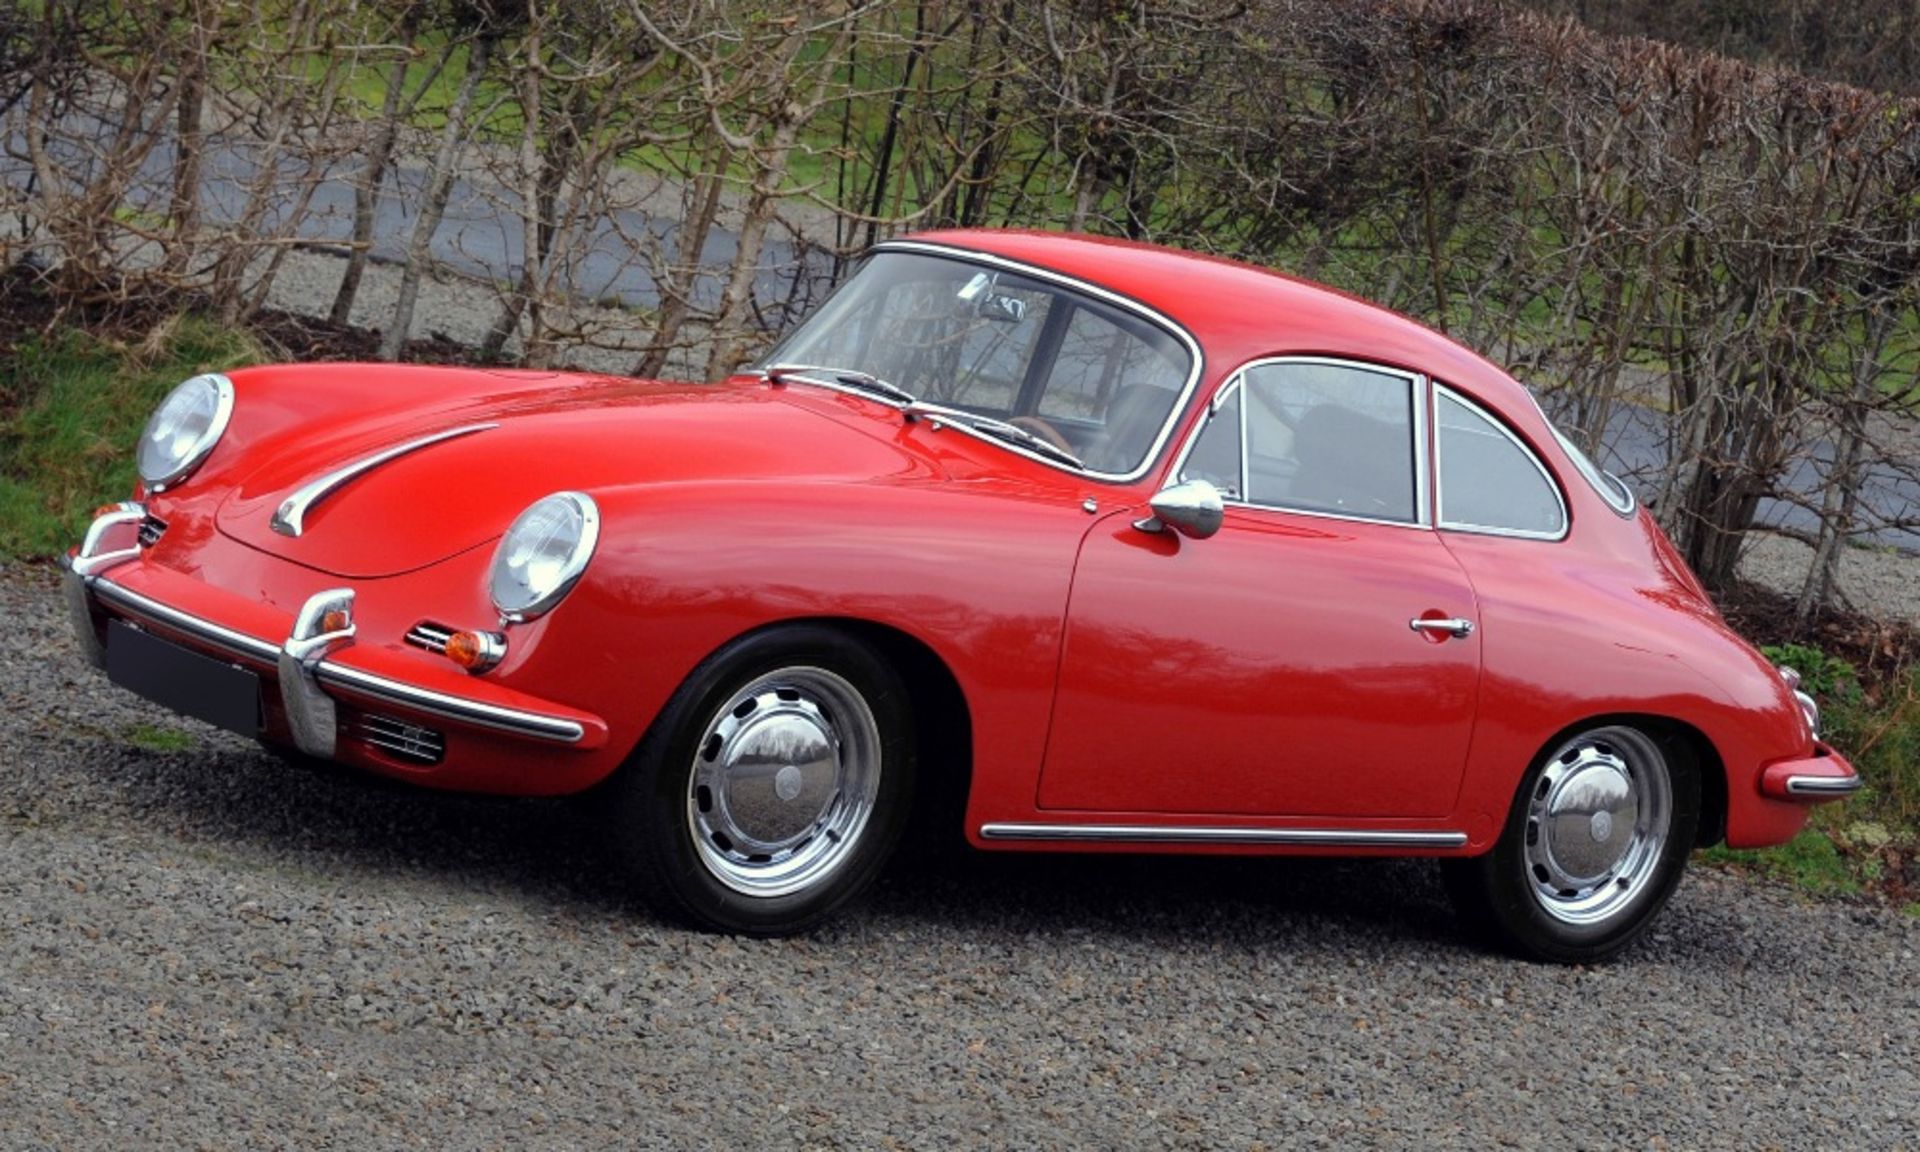 1964 PORSCHE 356 C COUPE BY KARMANN           Registration Number: DHJ 606B              Chassis - Image 5 of 14